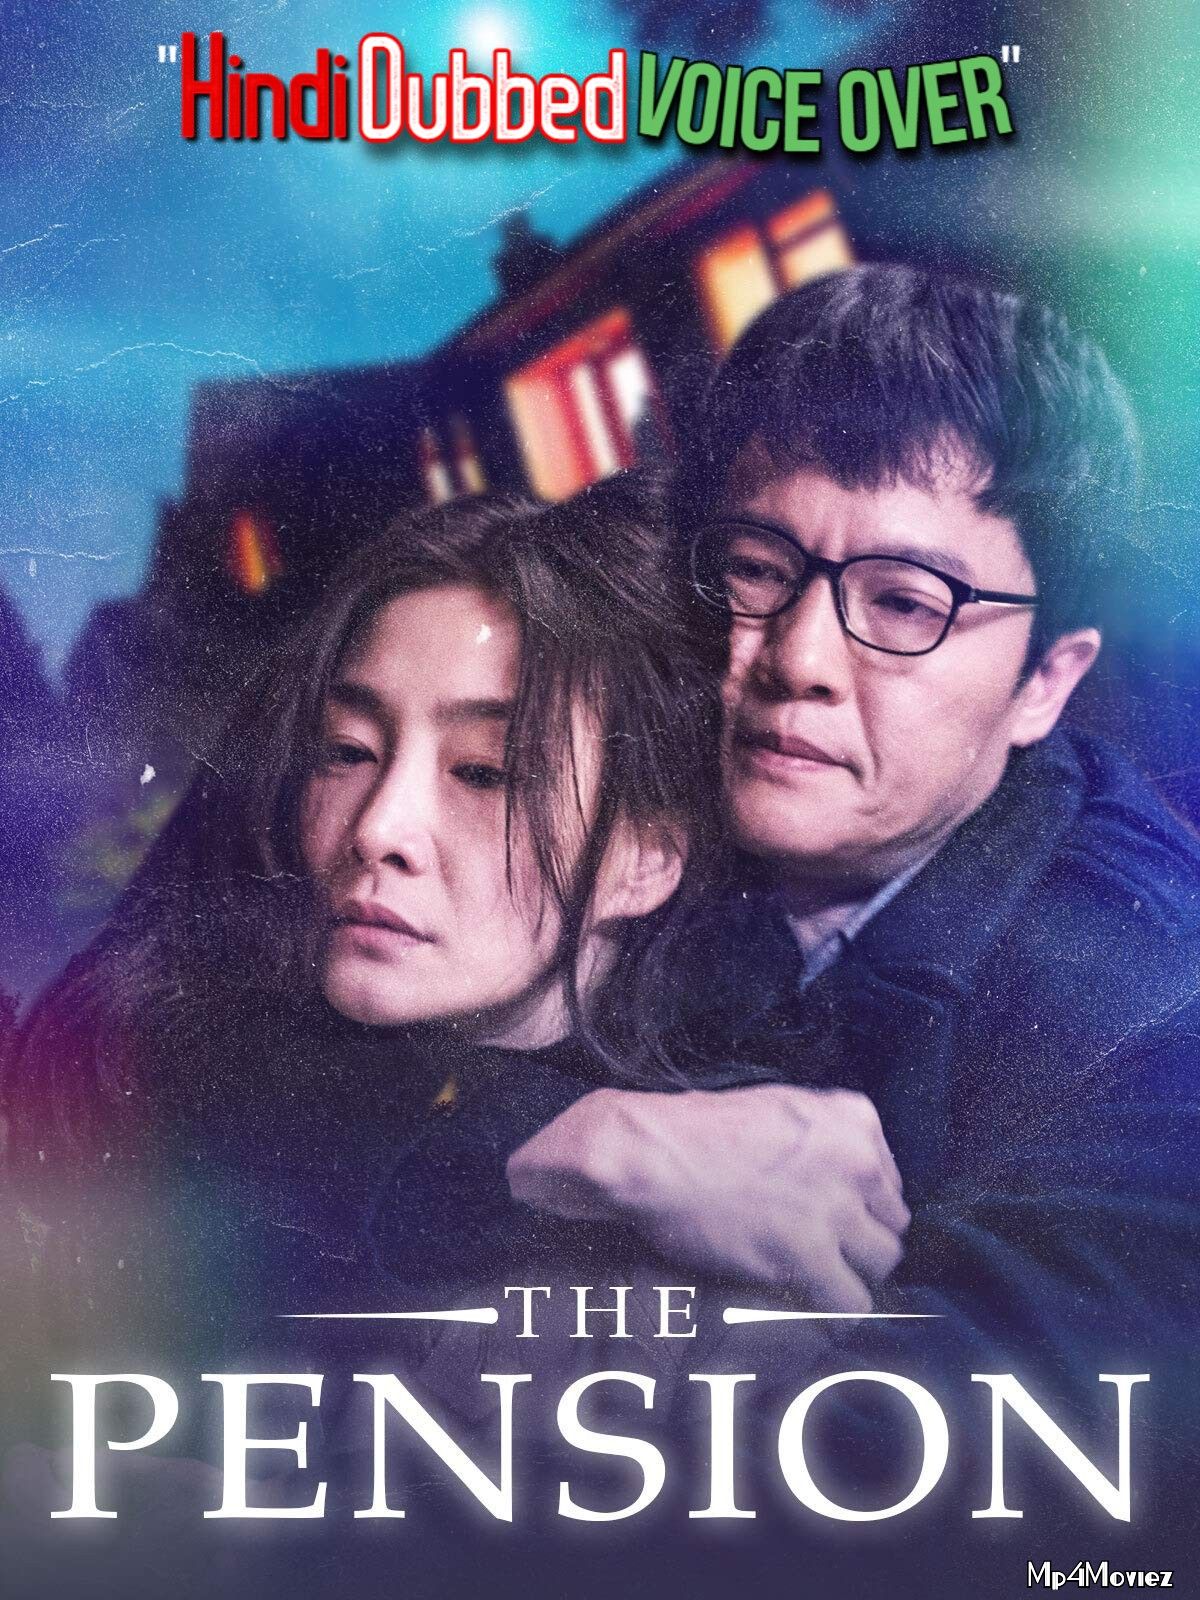 The Pension (2018) Hindi (Voice Over) Dubbed WEBRip download full movie